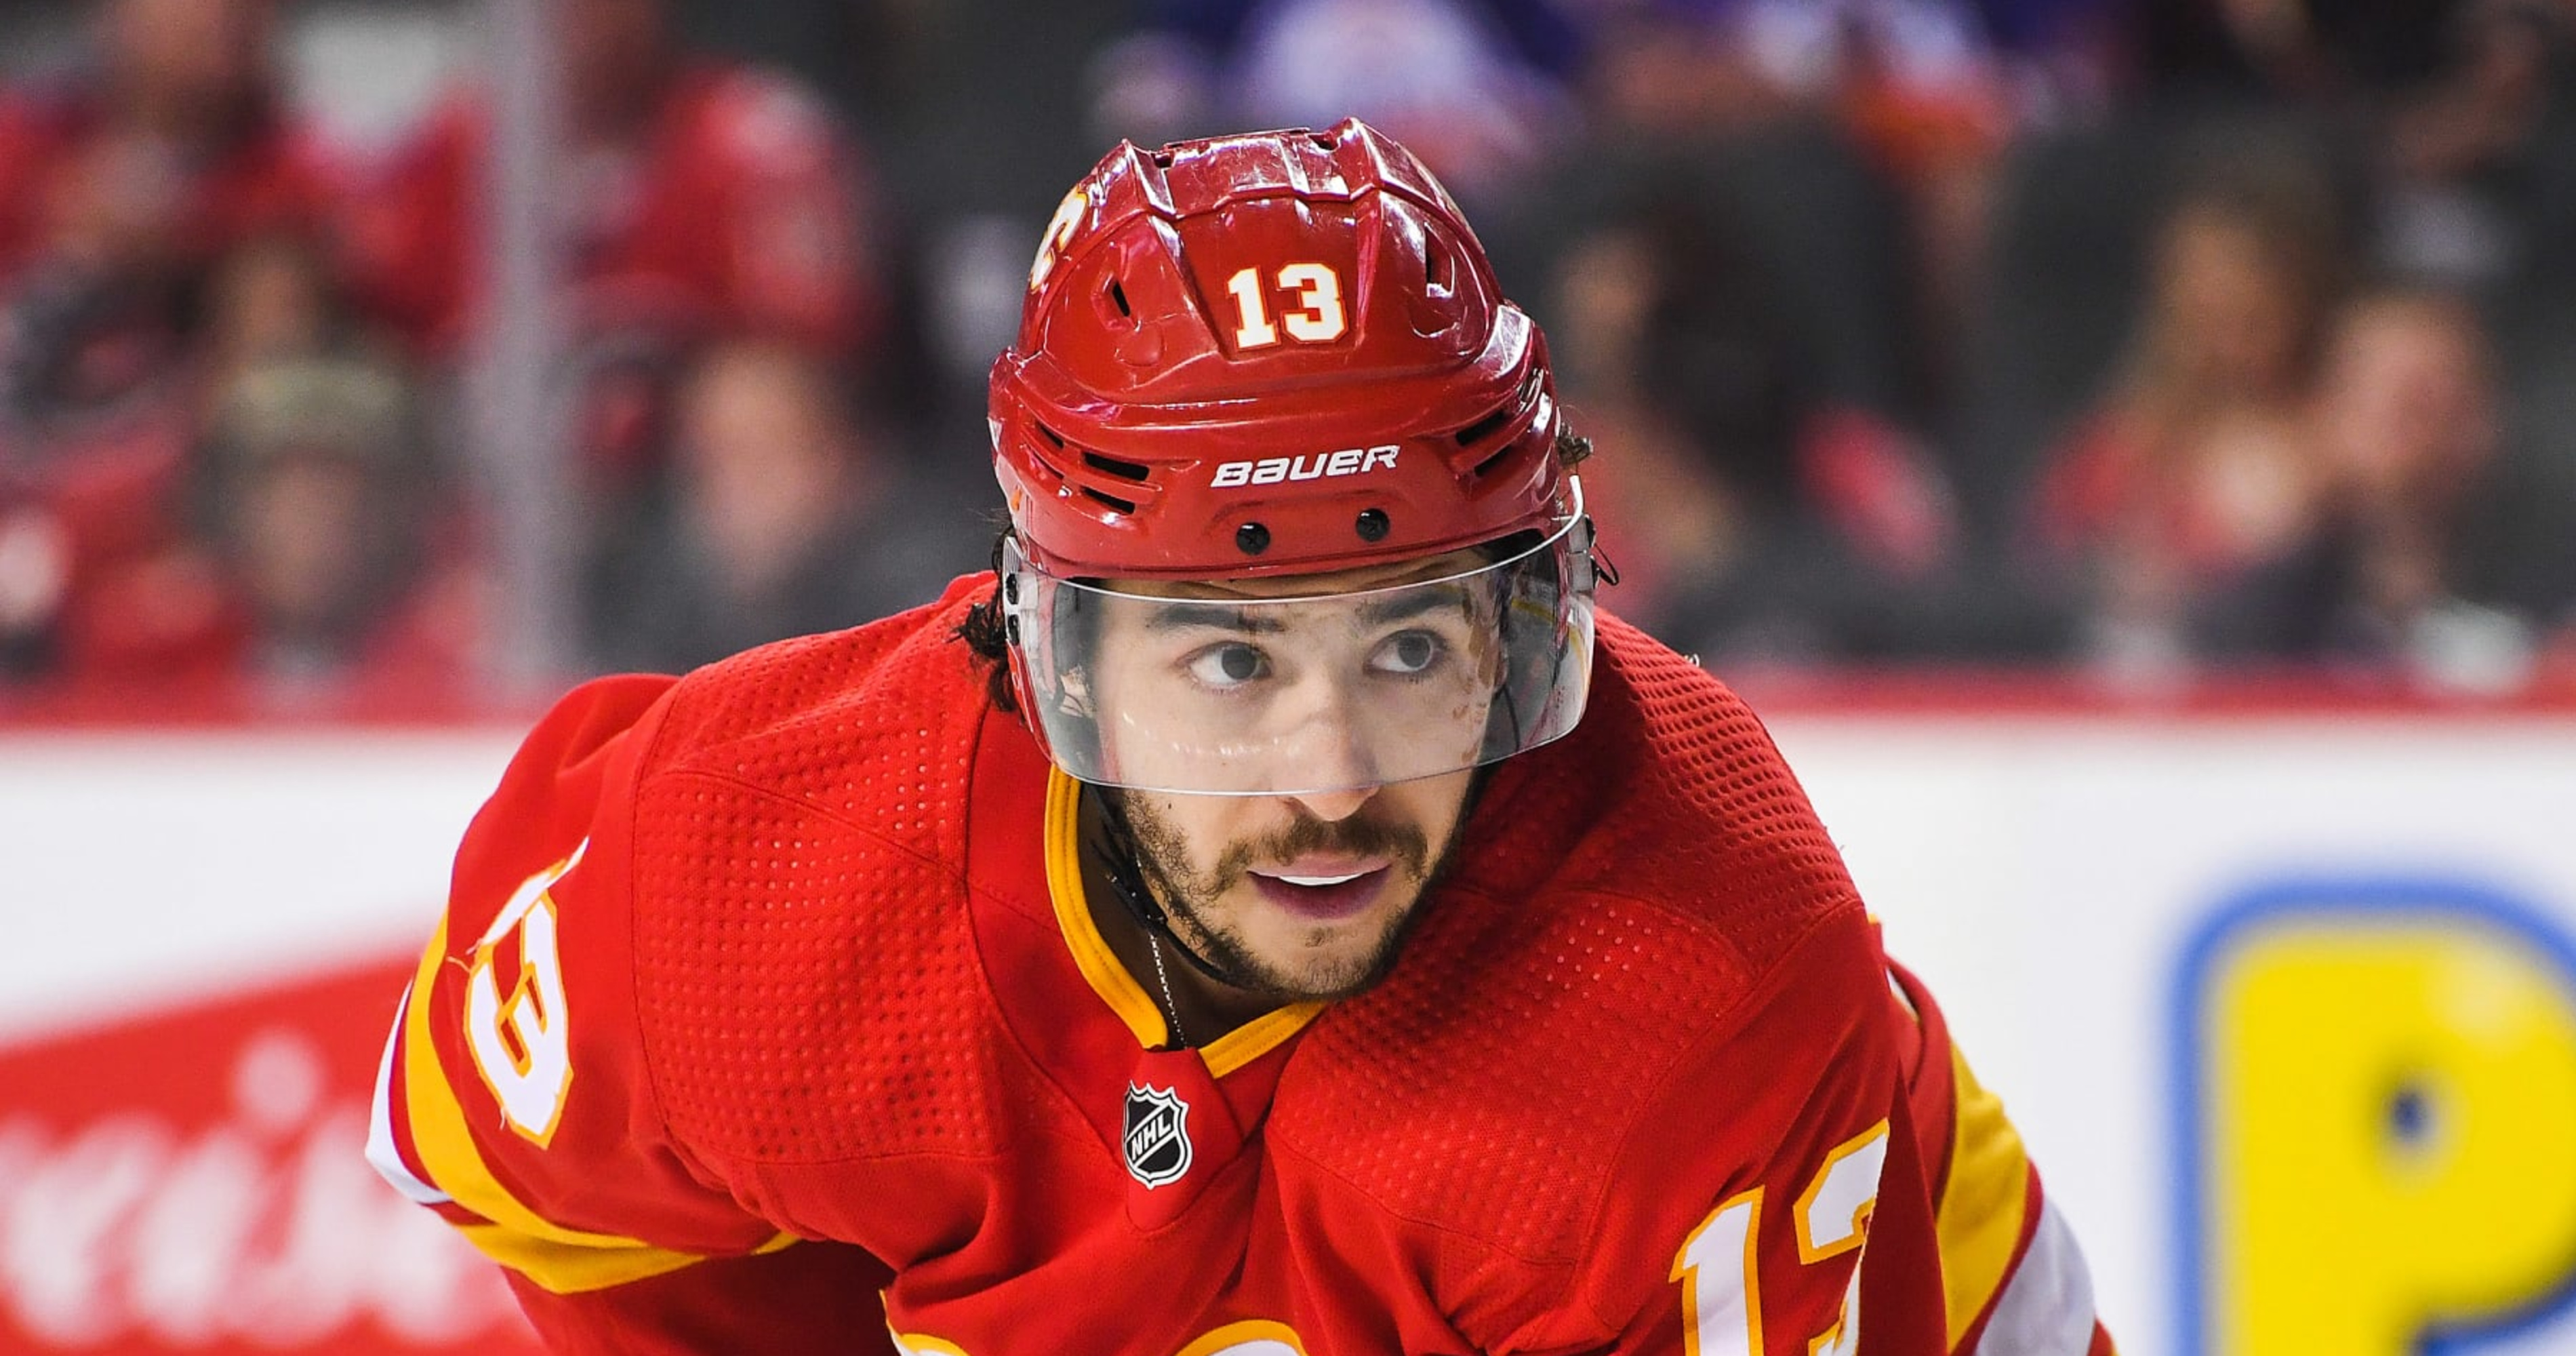 Flames star Johnny Gaudreau, a native of South Jersey, could be an